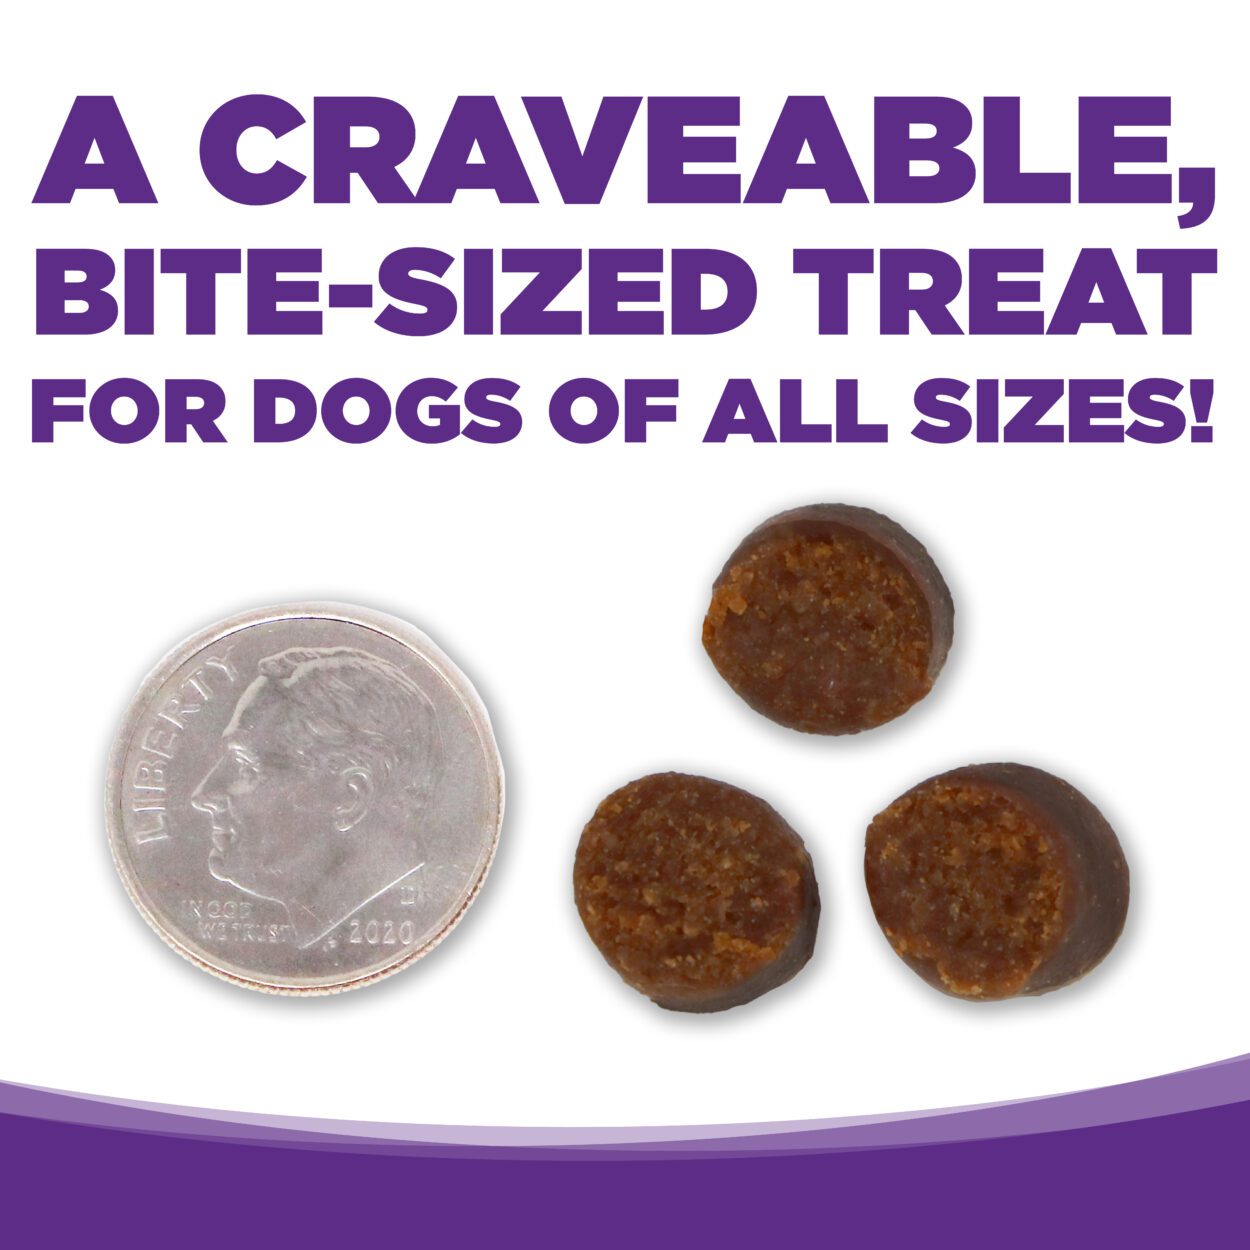 A CRAVEABLE BITE-SIZED TREAT FOR DOGS OF ALL SIZES!